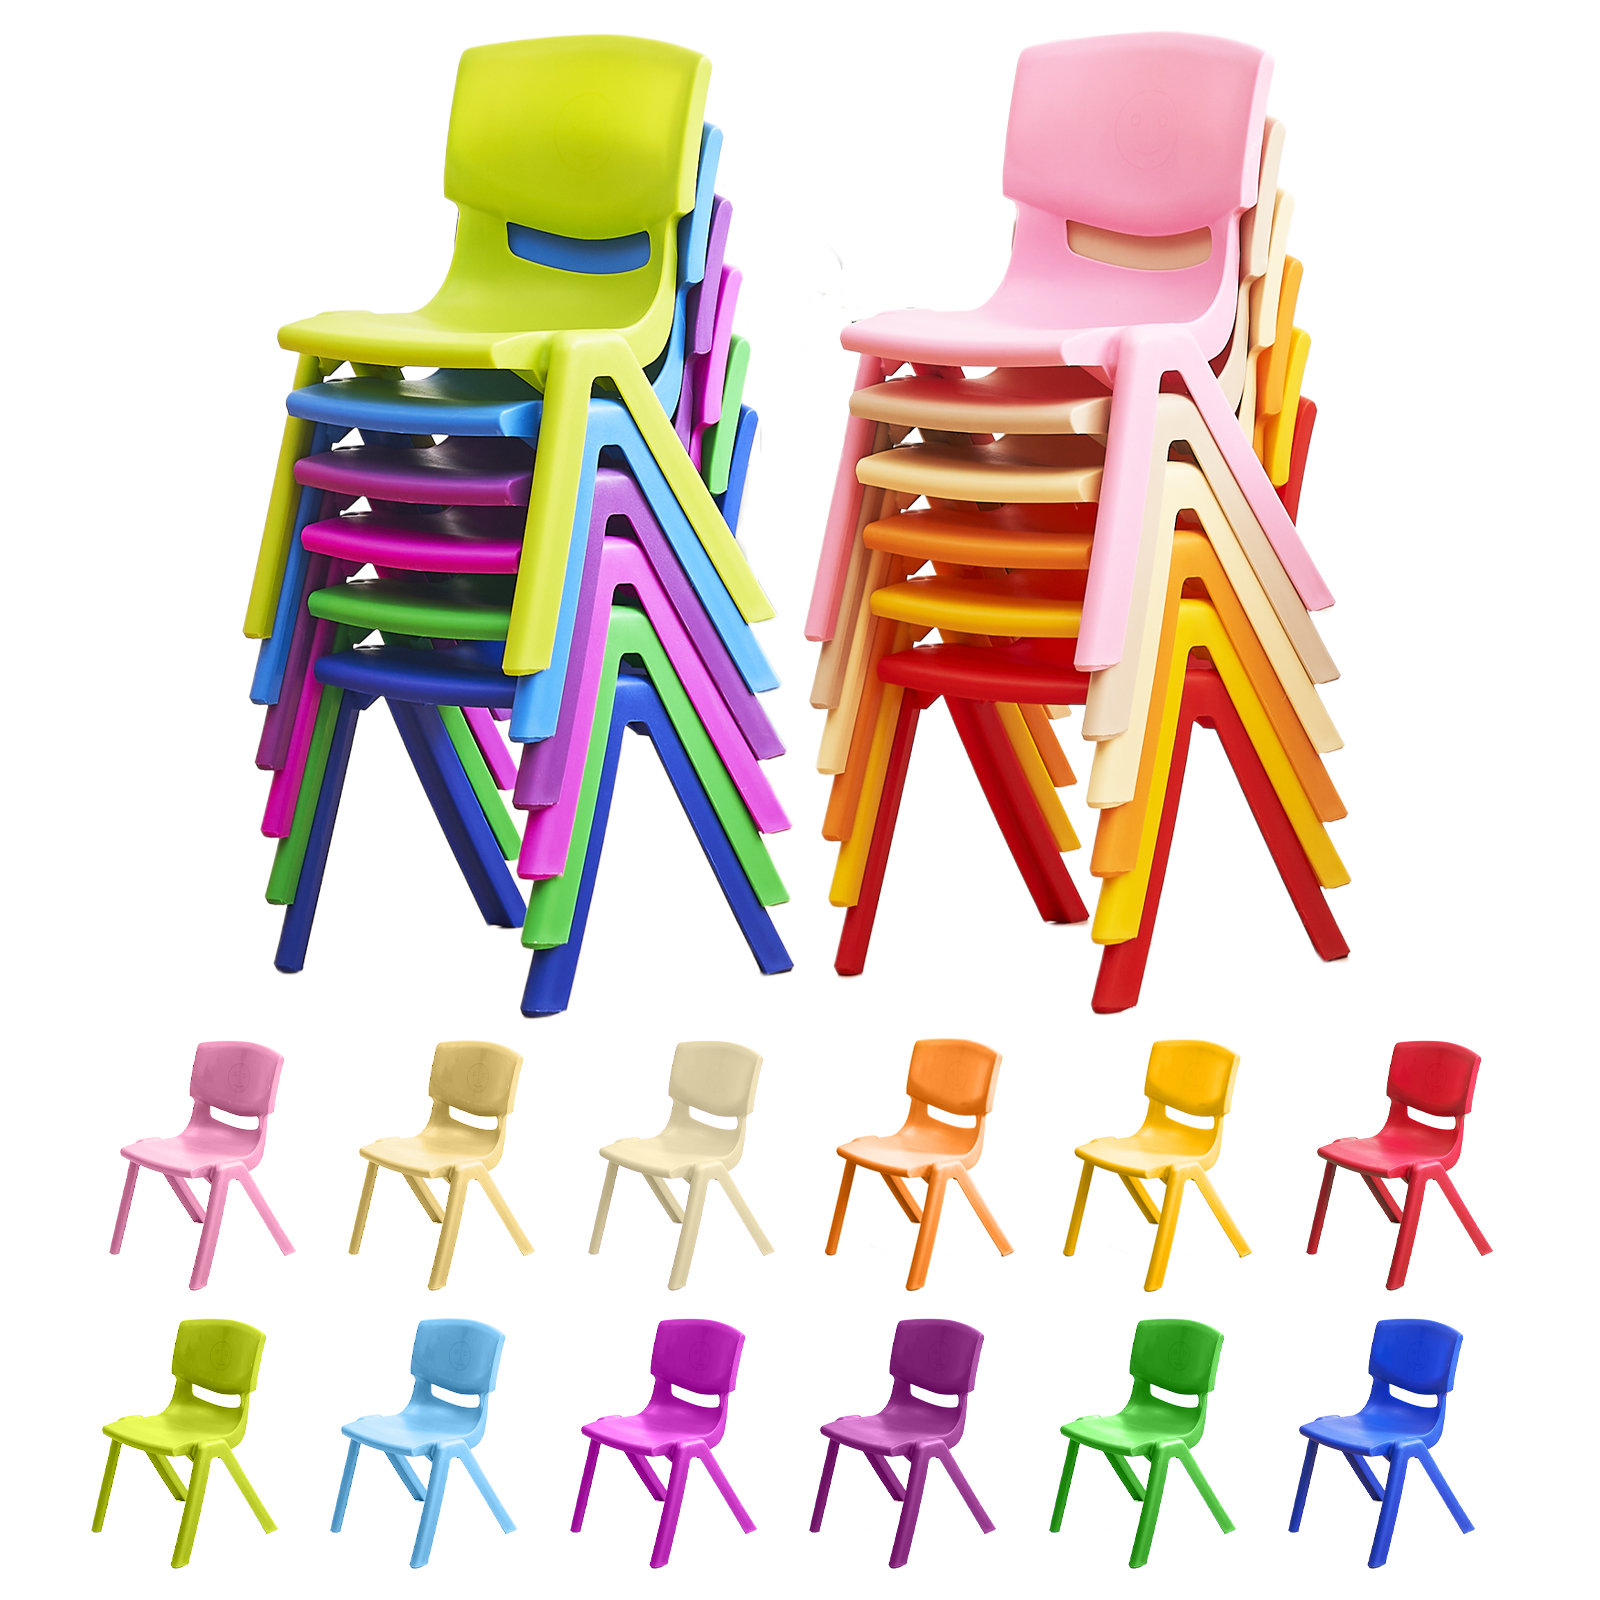 linor 12Pcs Stackable School Chairs, Colourful Kids Plastic Chair for